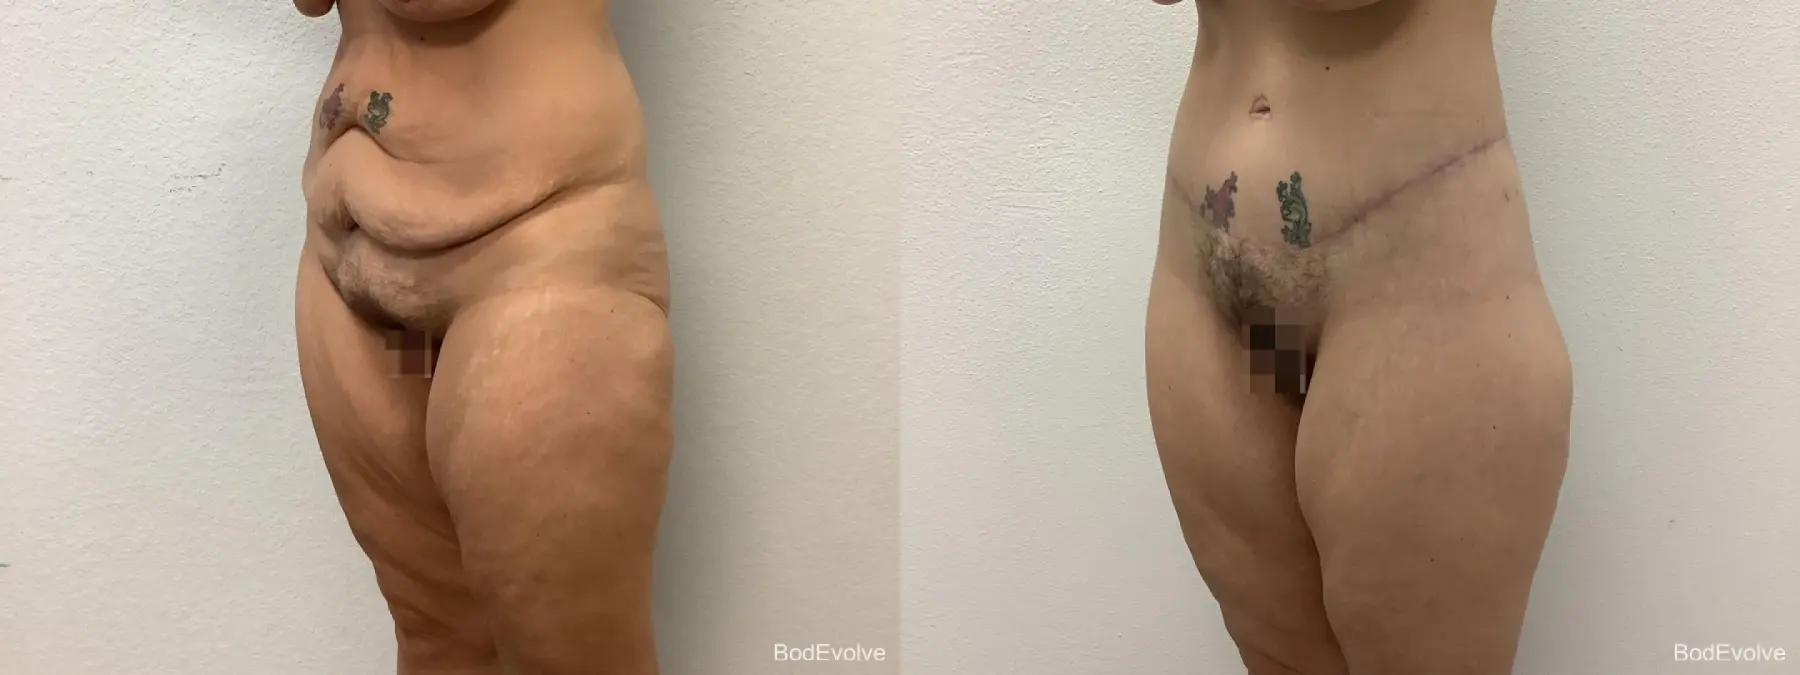 Body Lift: Patient 1 - Before and After 2